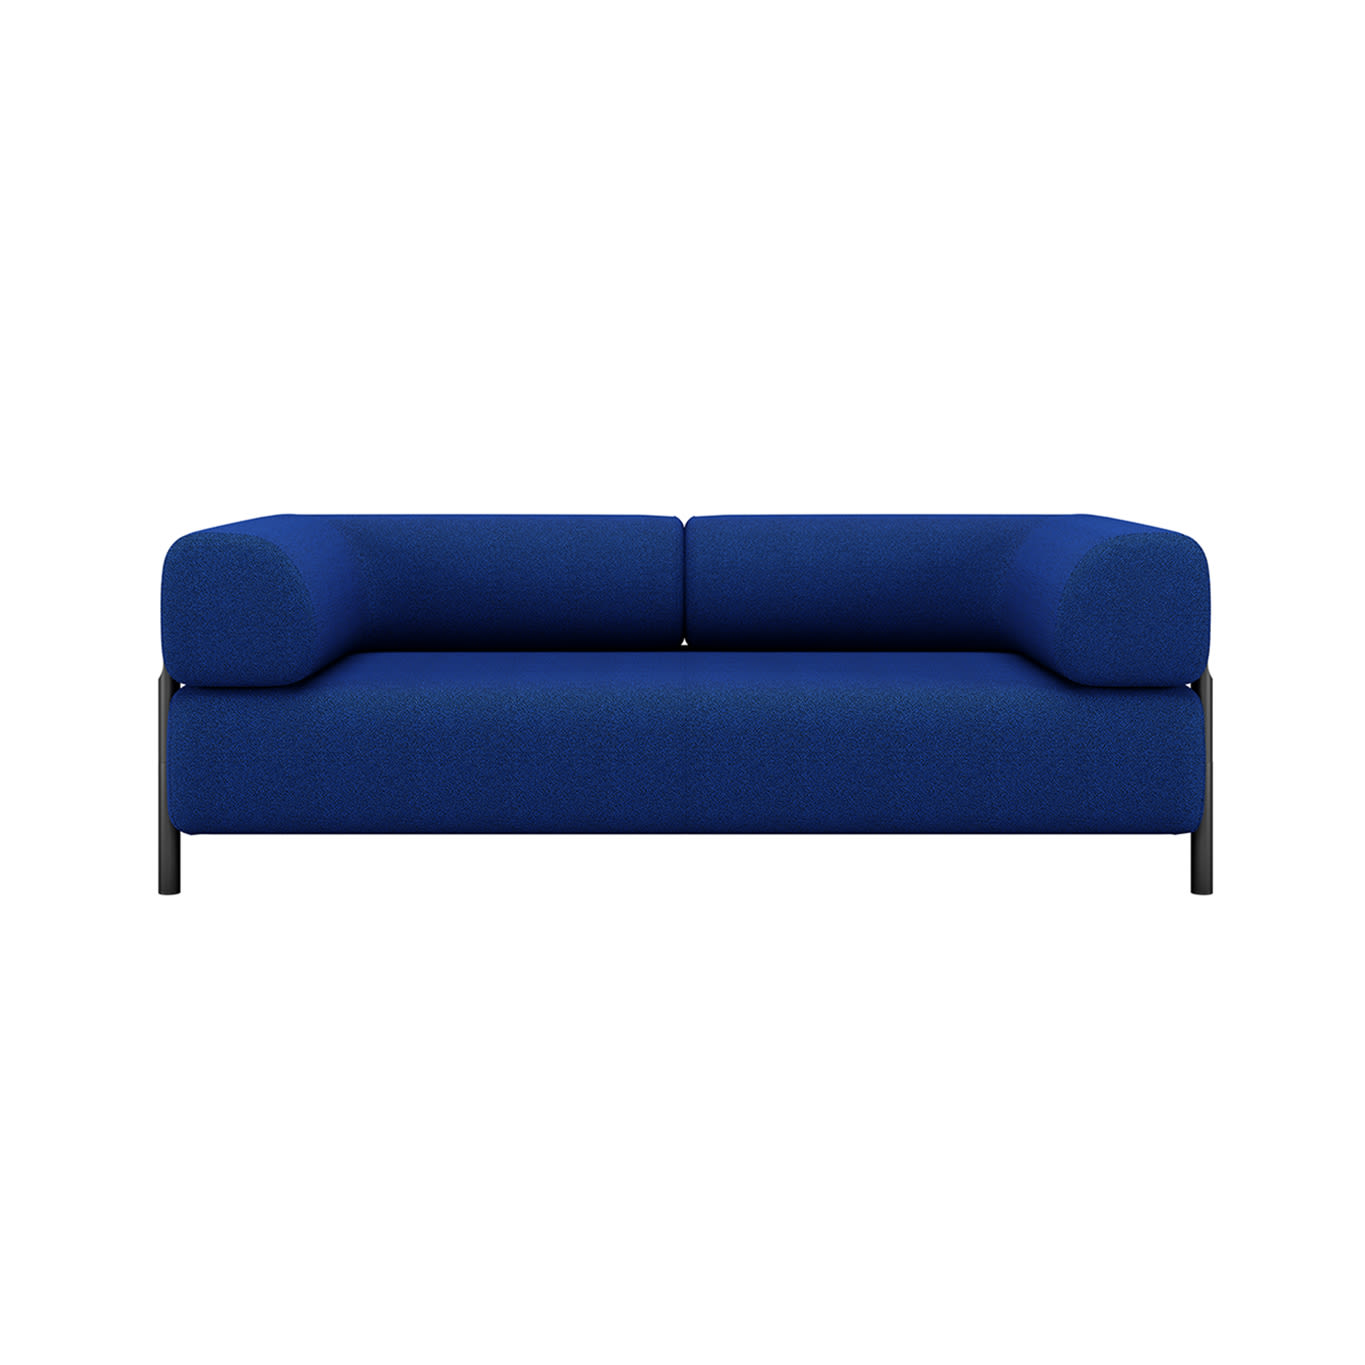 2-seater Sofa with Armrests, Cobalt